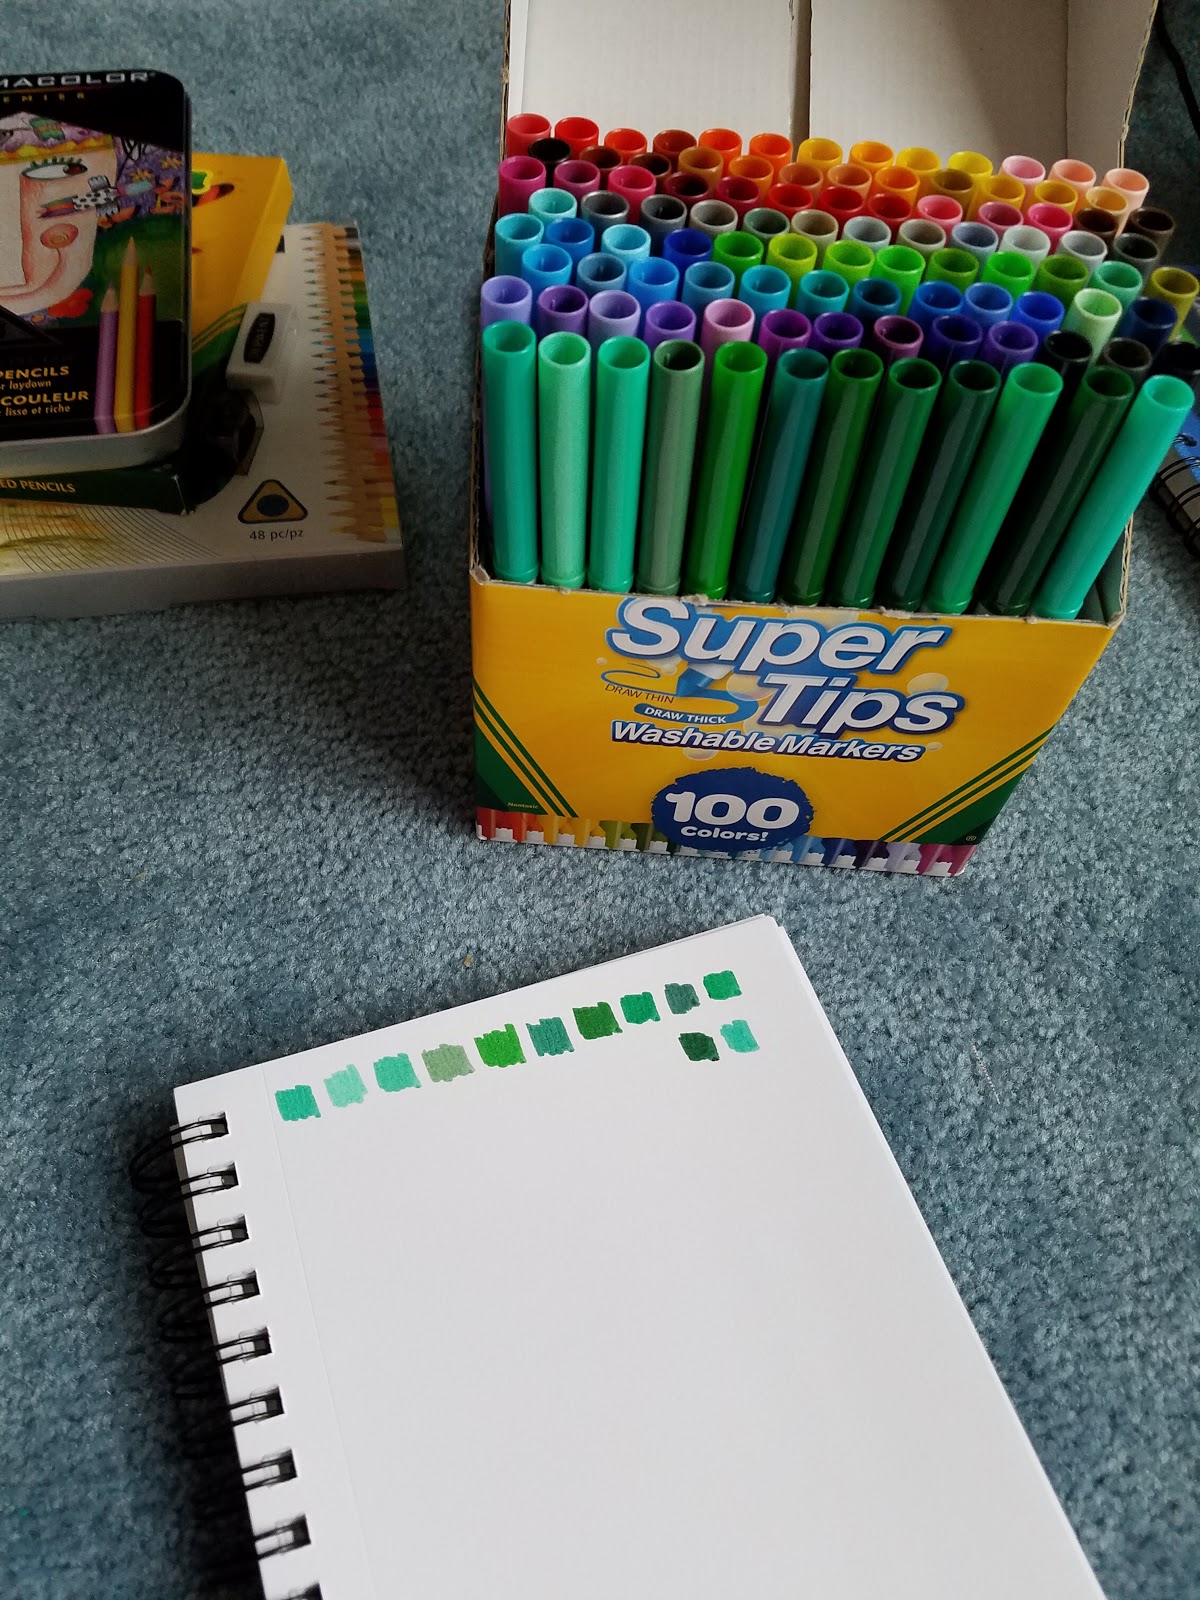 Crayola Supertips 100 Pack ✨I love these pens! They aren't